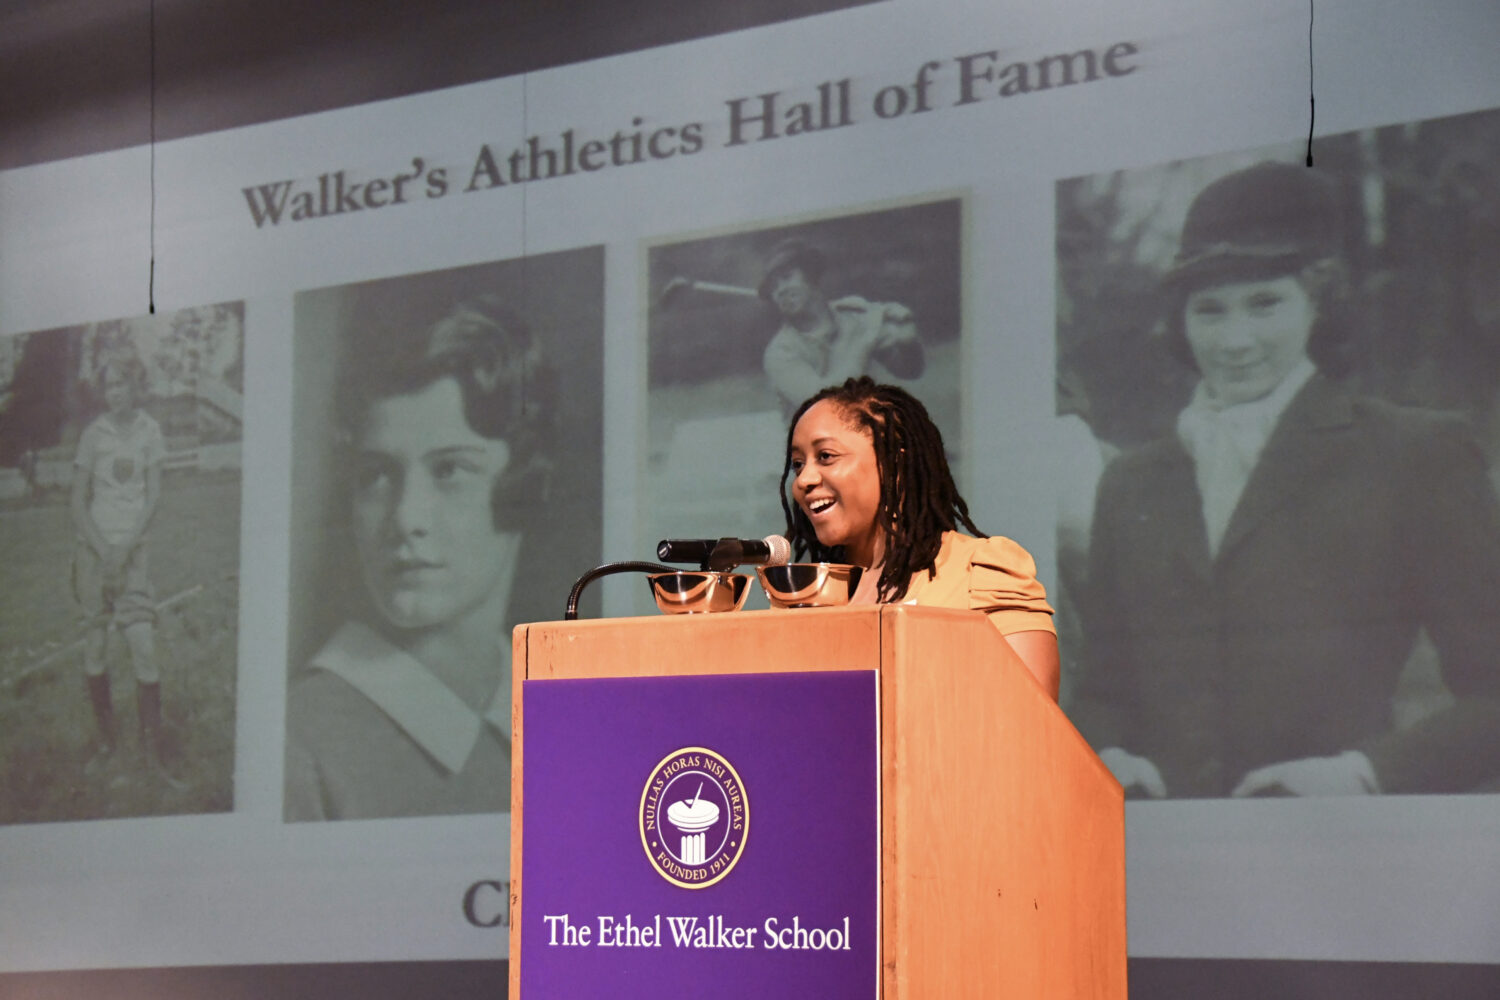 Athletics Hall of Fame Inaugural Induction Ceremony